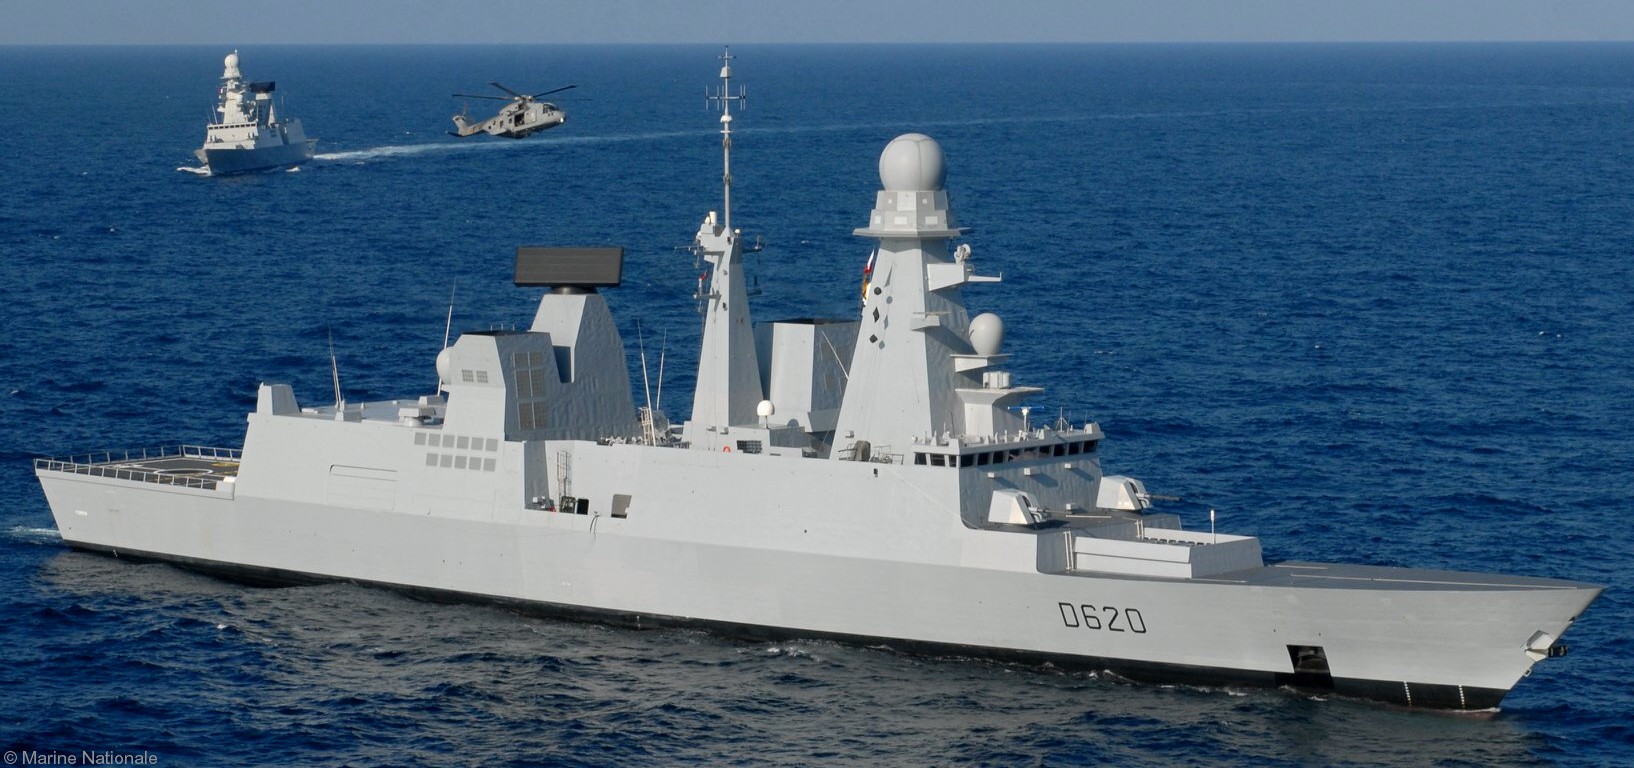 d-620 fs forbin horizon class guided missile frigate anti-air-warfare aaw ffgh french navy marine nationale 24